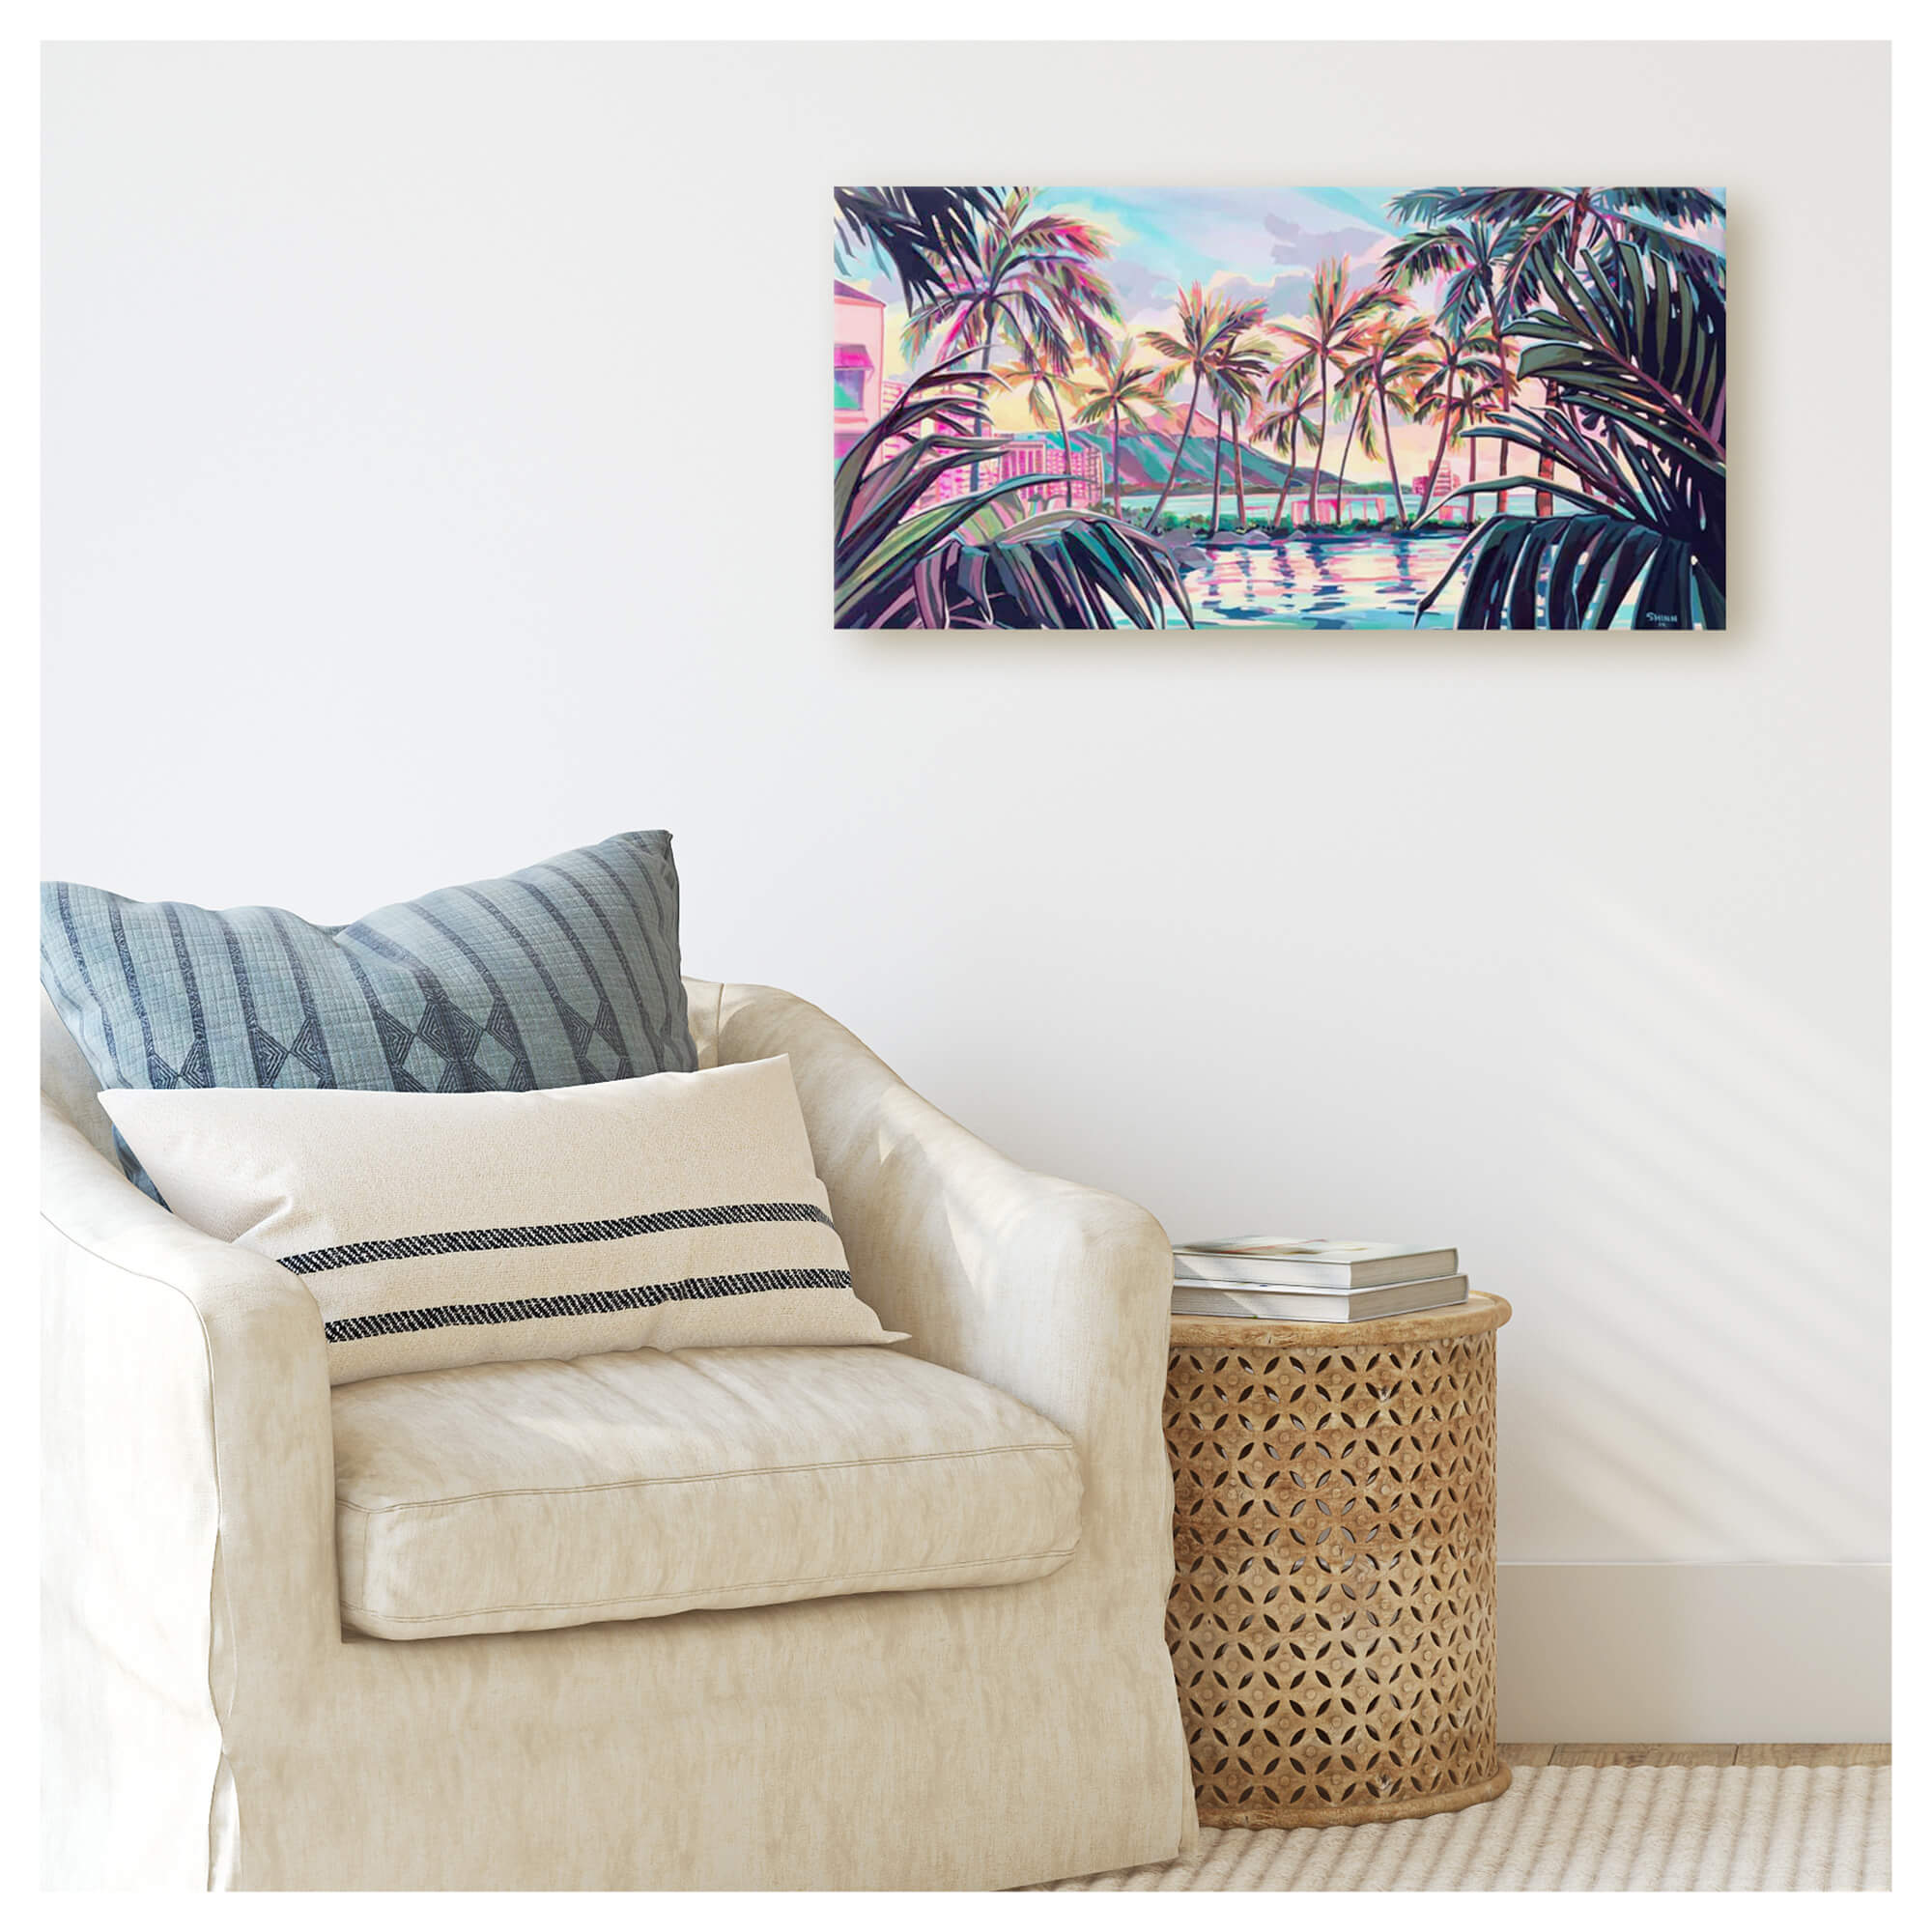 A canvas giclée art print of the poolside view as the sun sets on the Sheraton Hotel in Waikiki by Hawaii artist Christie Shinn